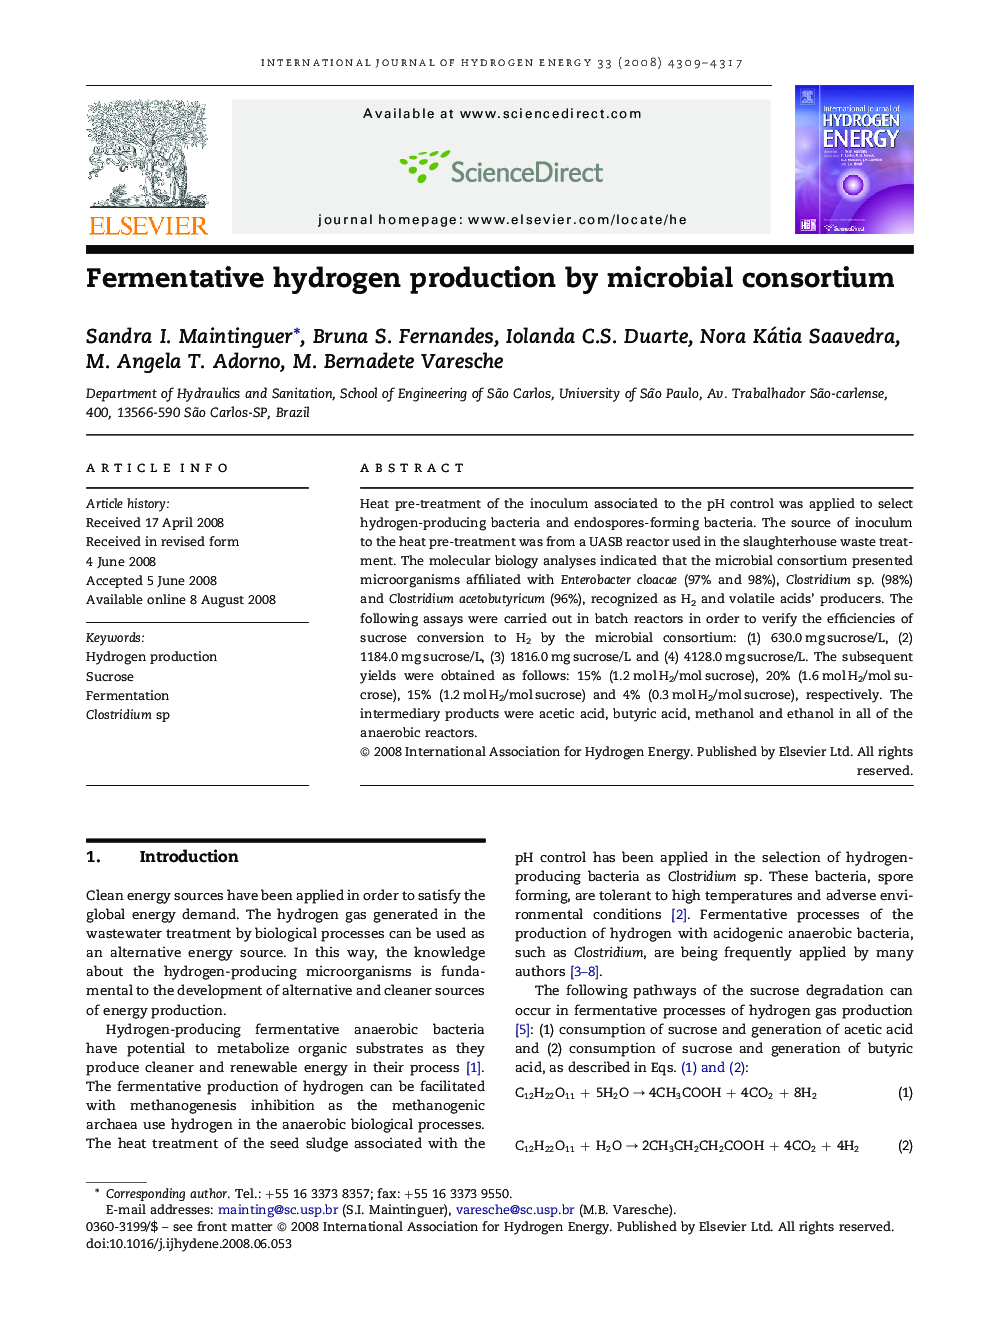 Fermentative hydrogen production by microbial consortium